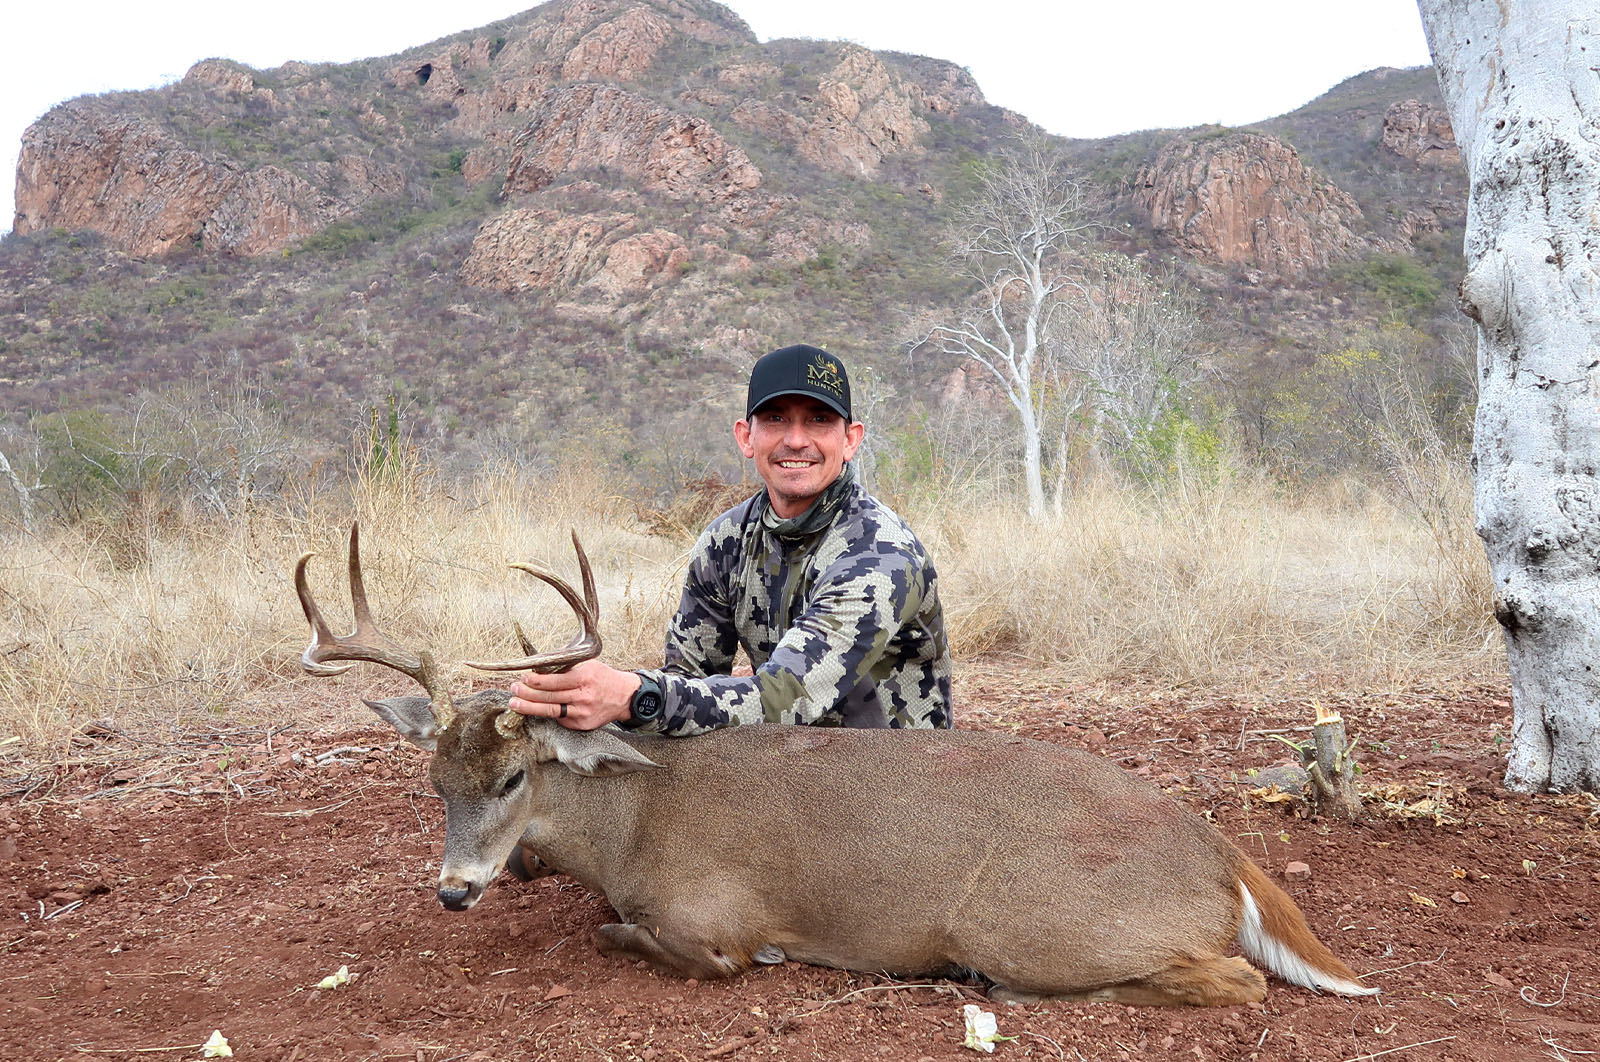 A male hunter with the Coues deer he harvested.